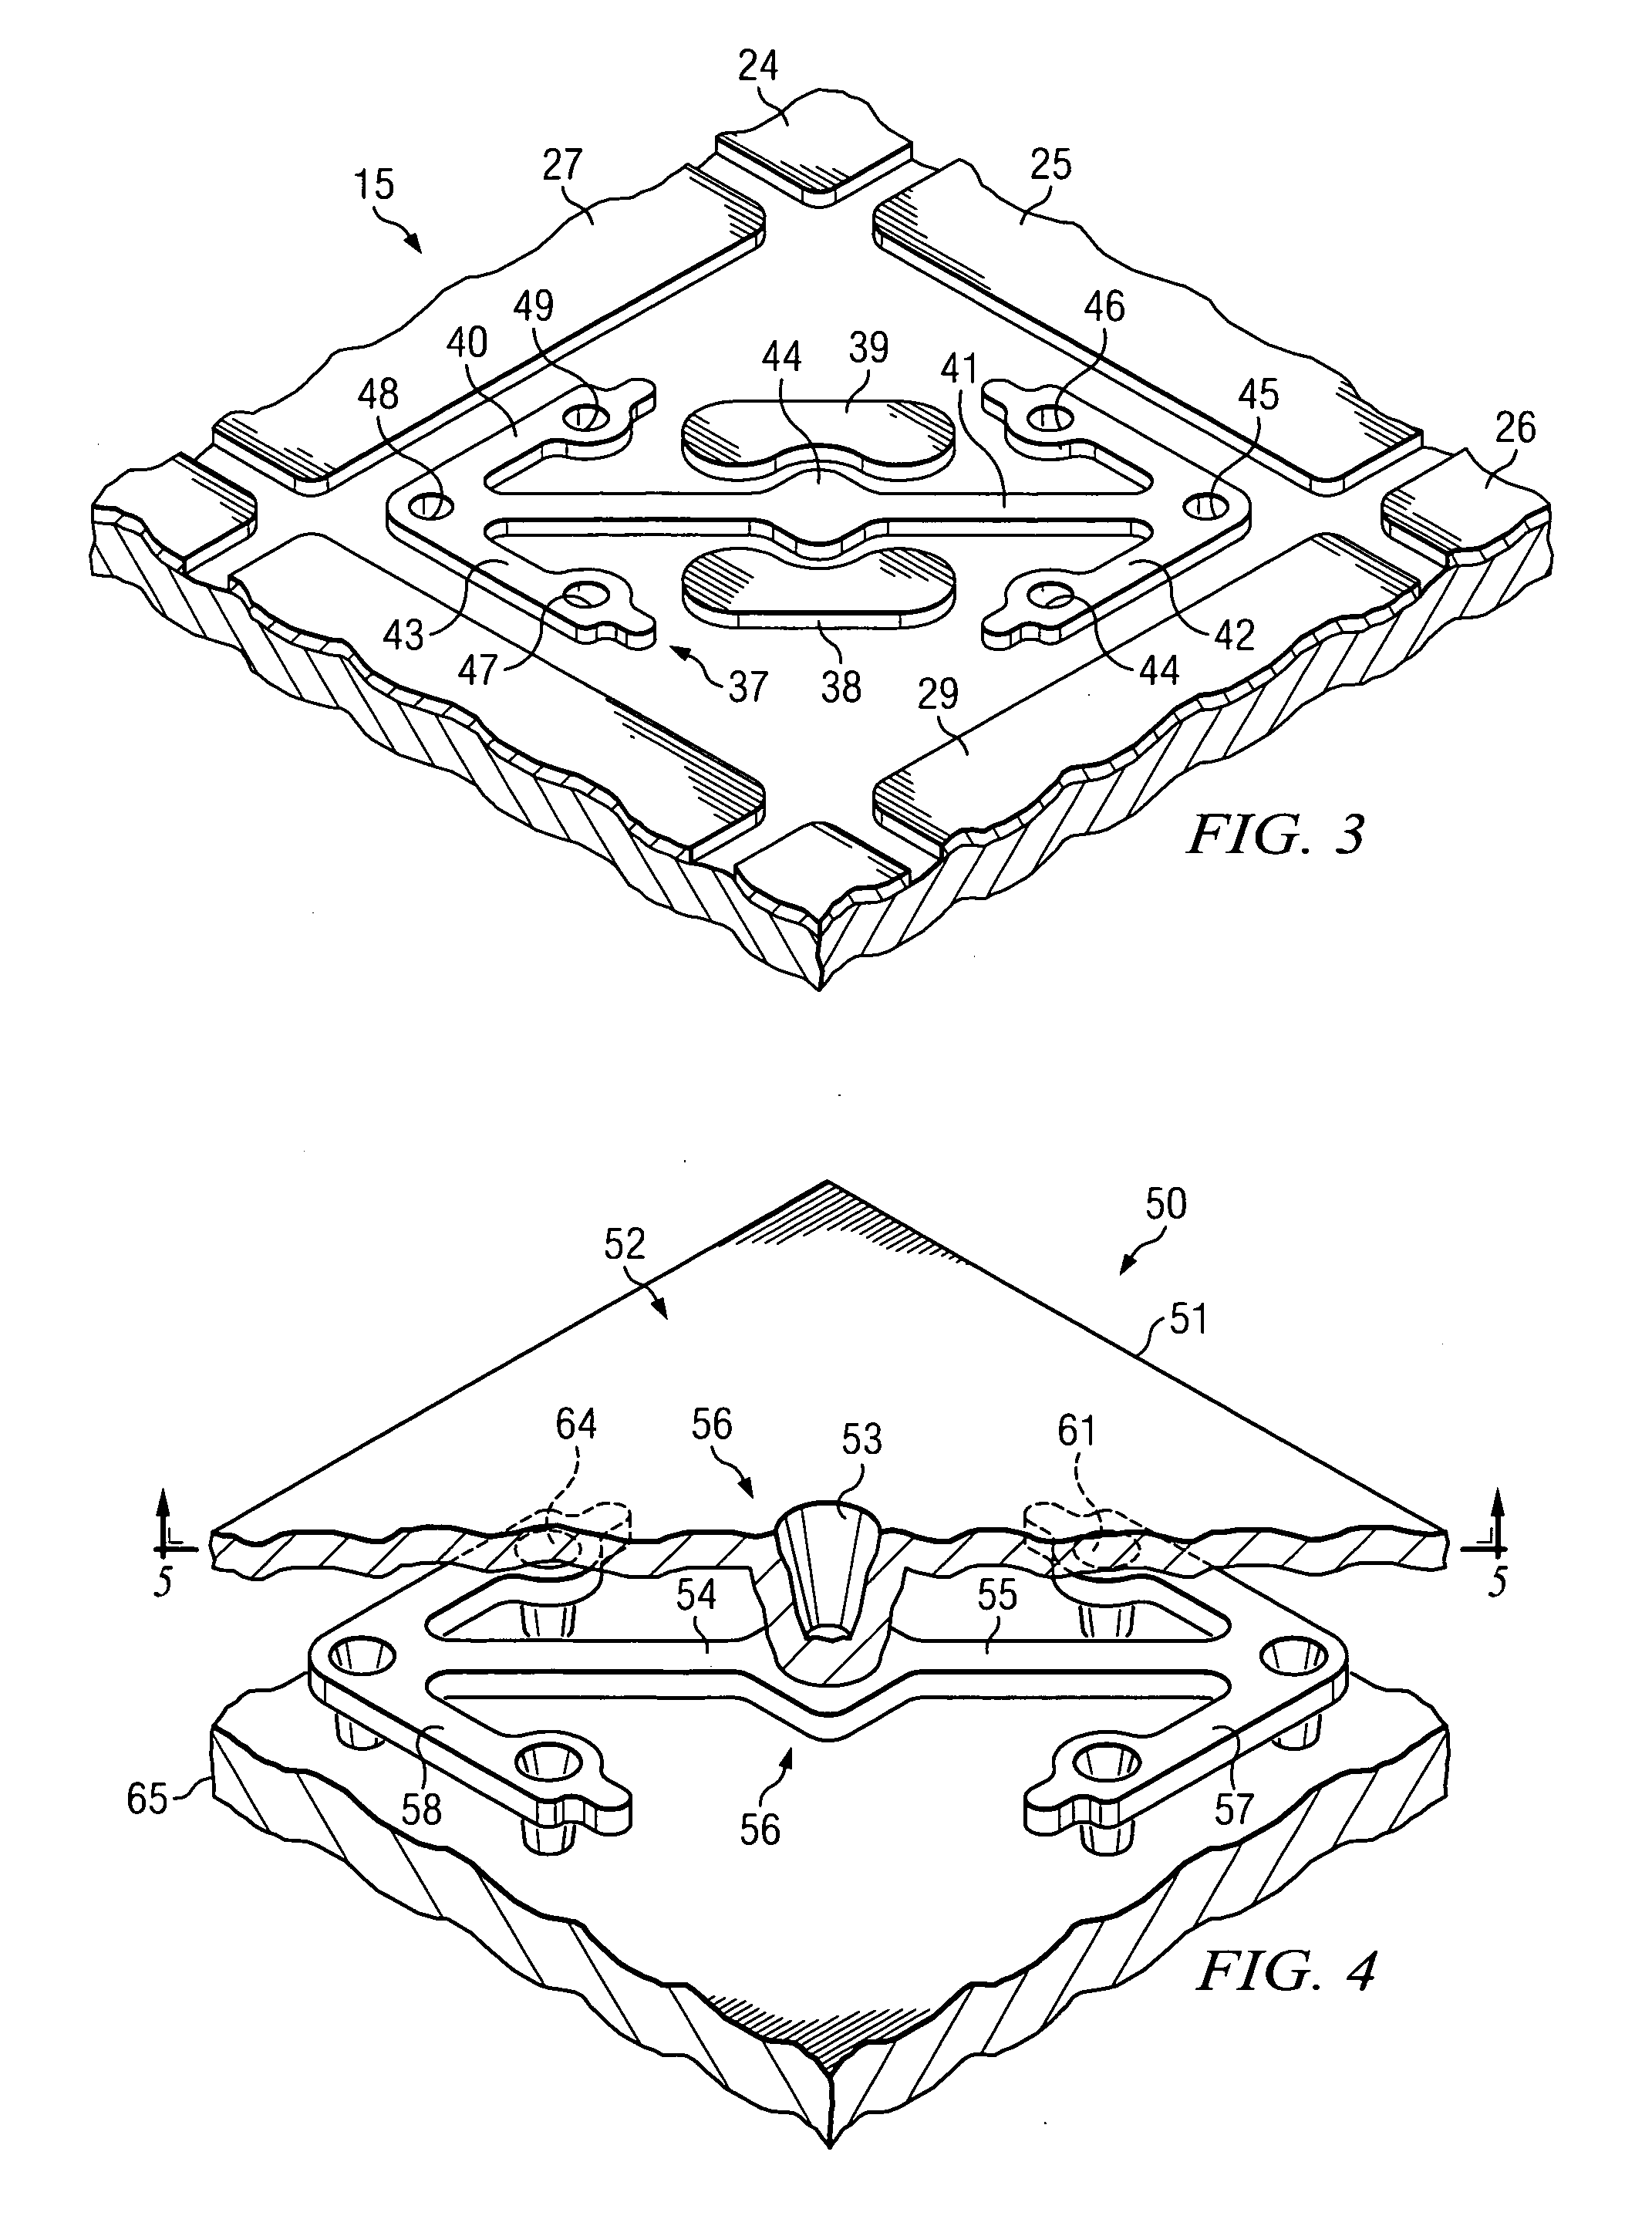 MEMS device and method